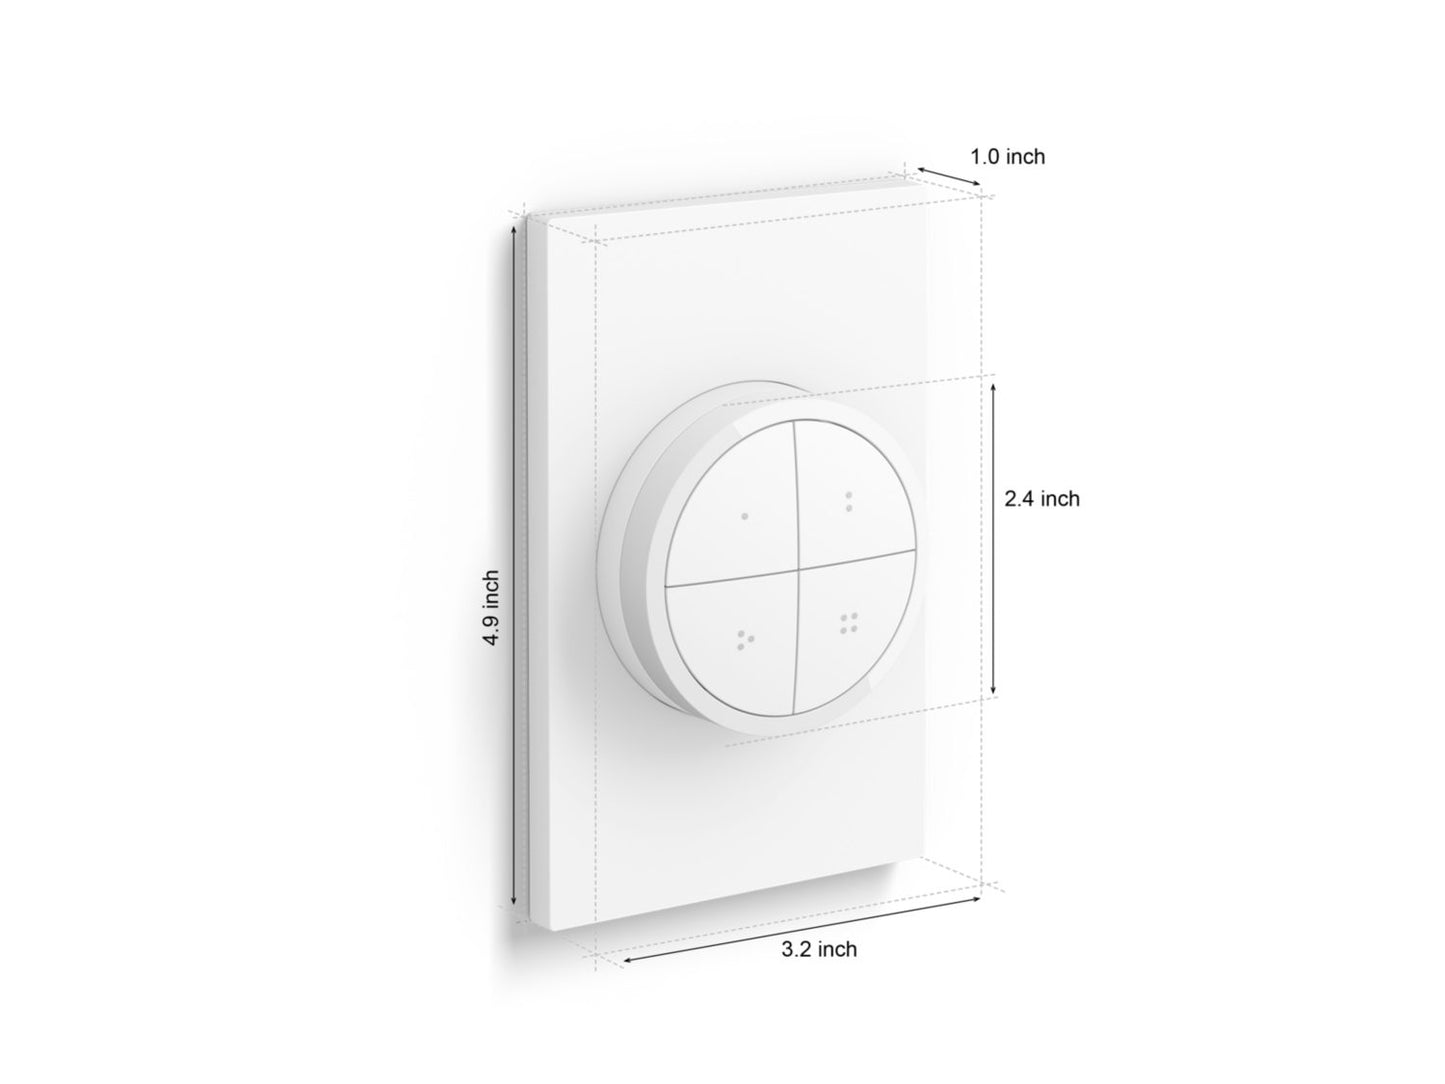 Philips Hue Tap Dial Switch dimensions